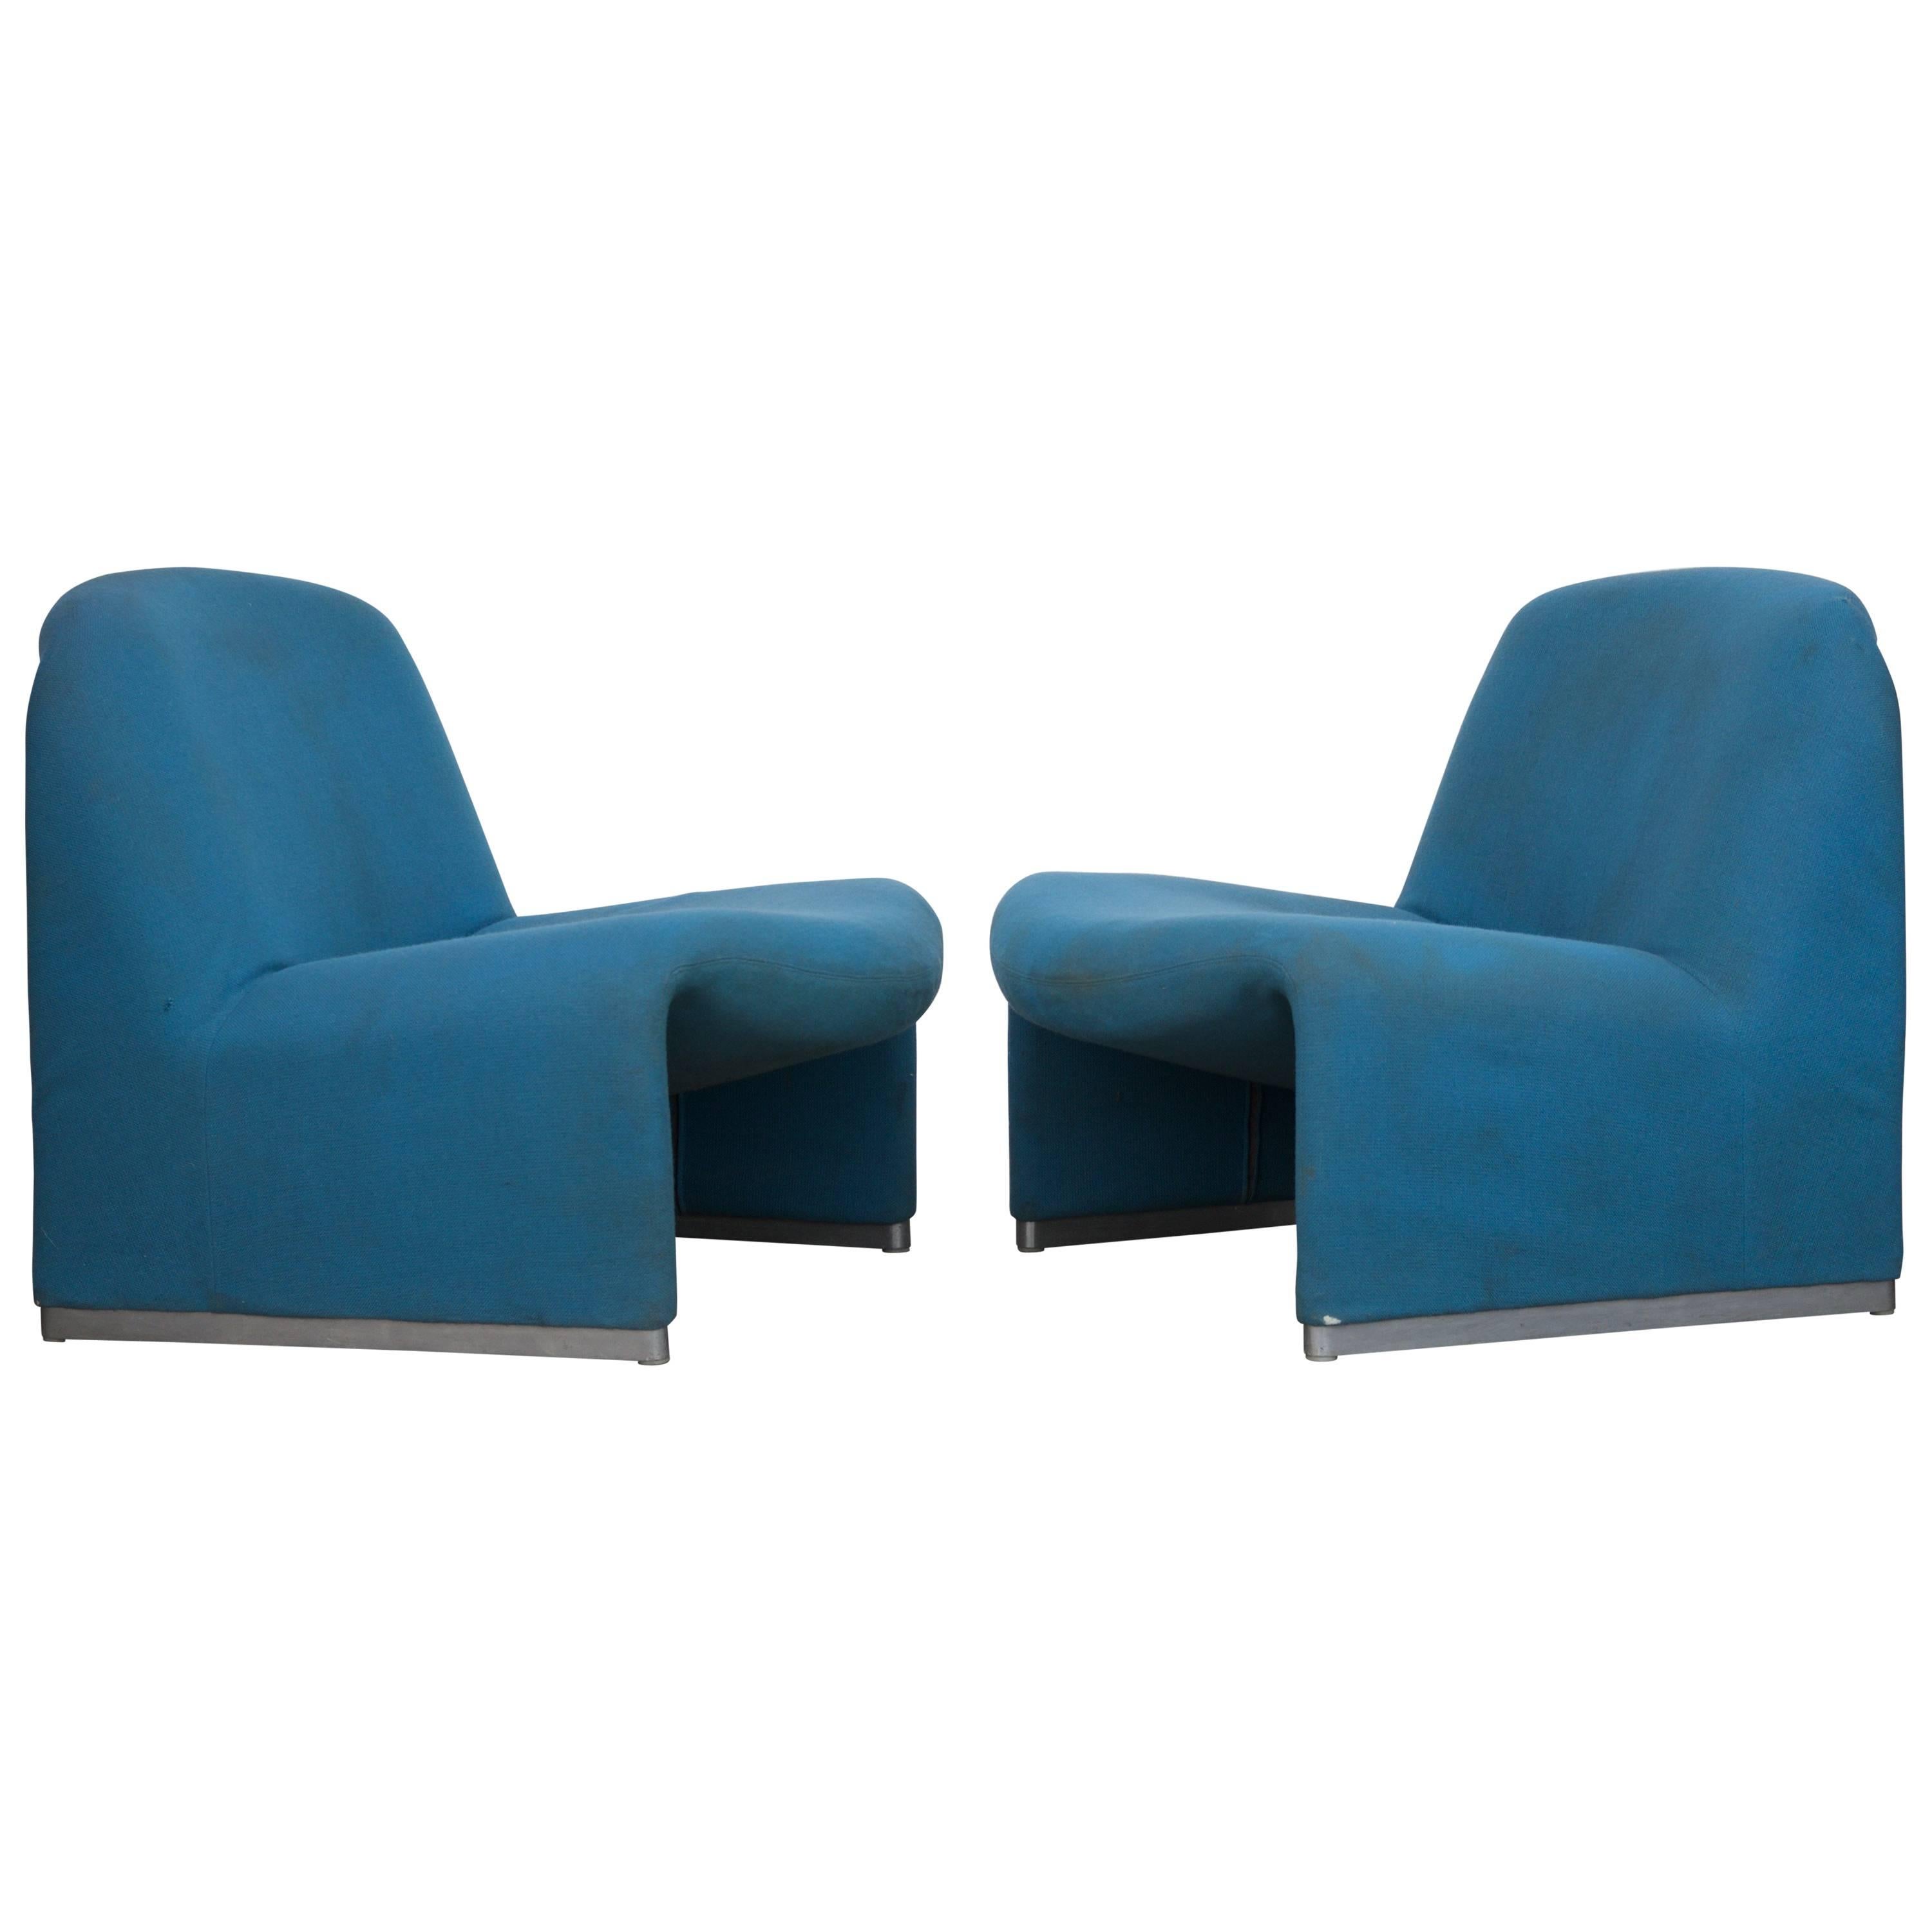 Pair of Original Alky Lounge Chairs by Giancarlo Piretti for Castelli